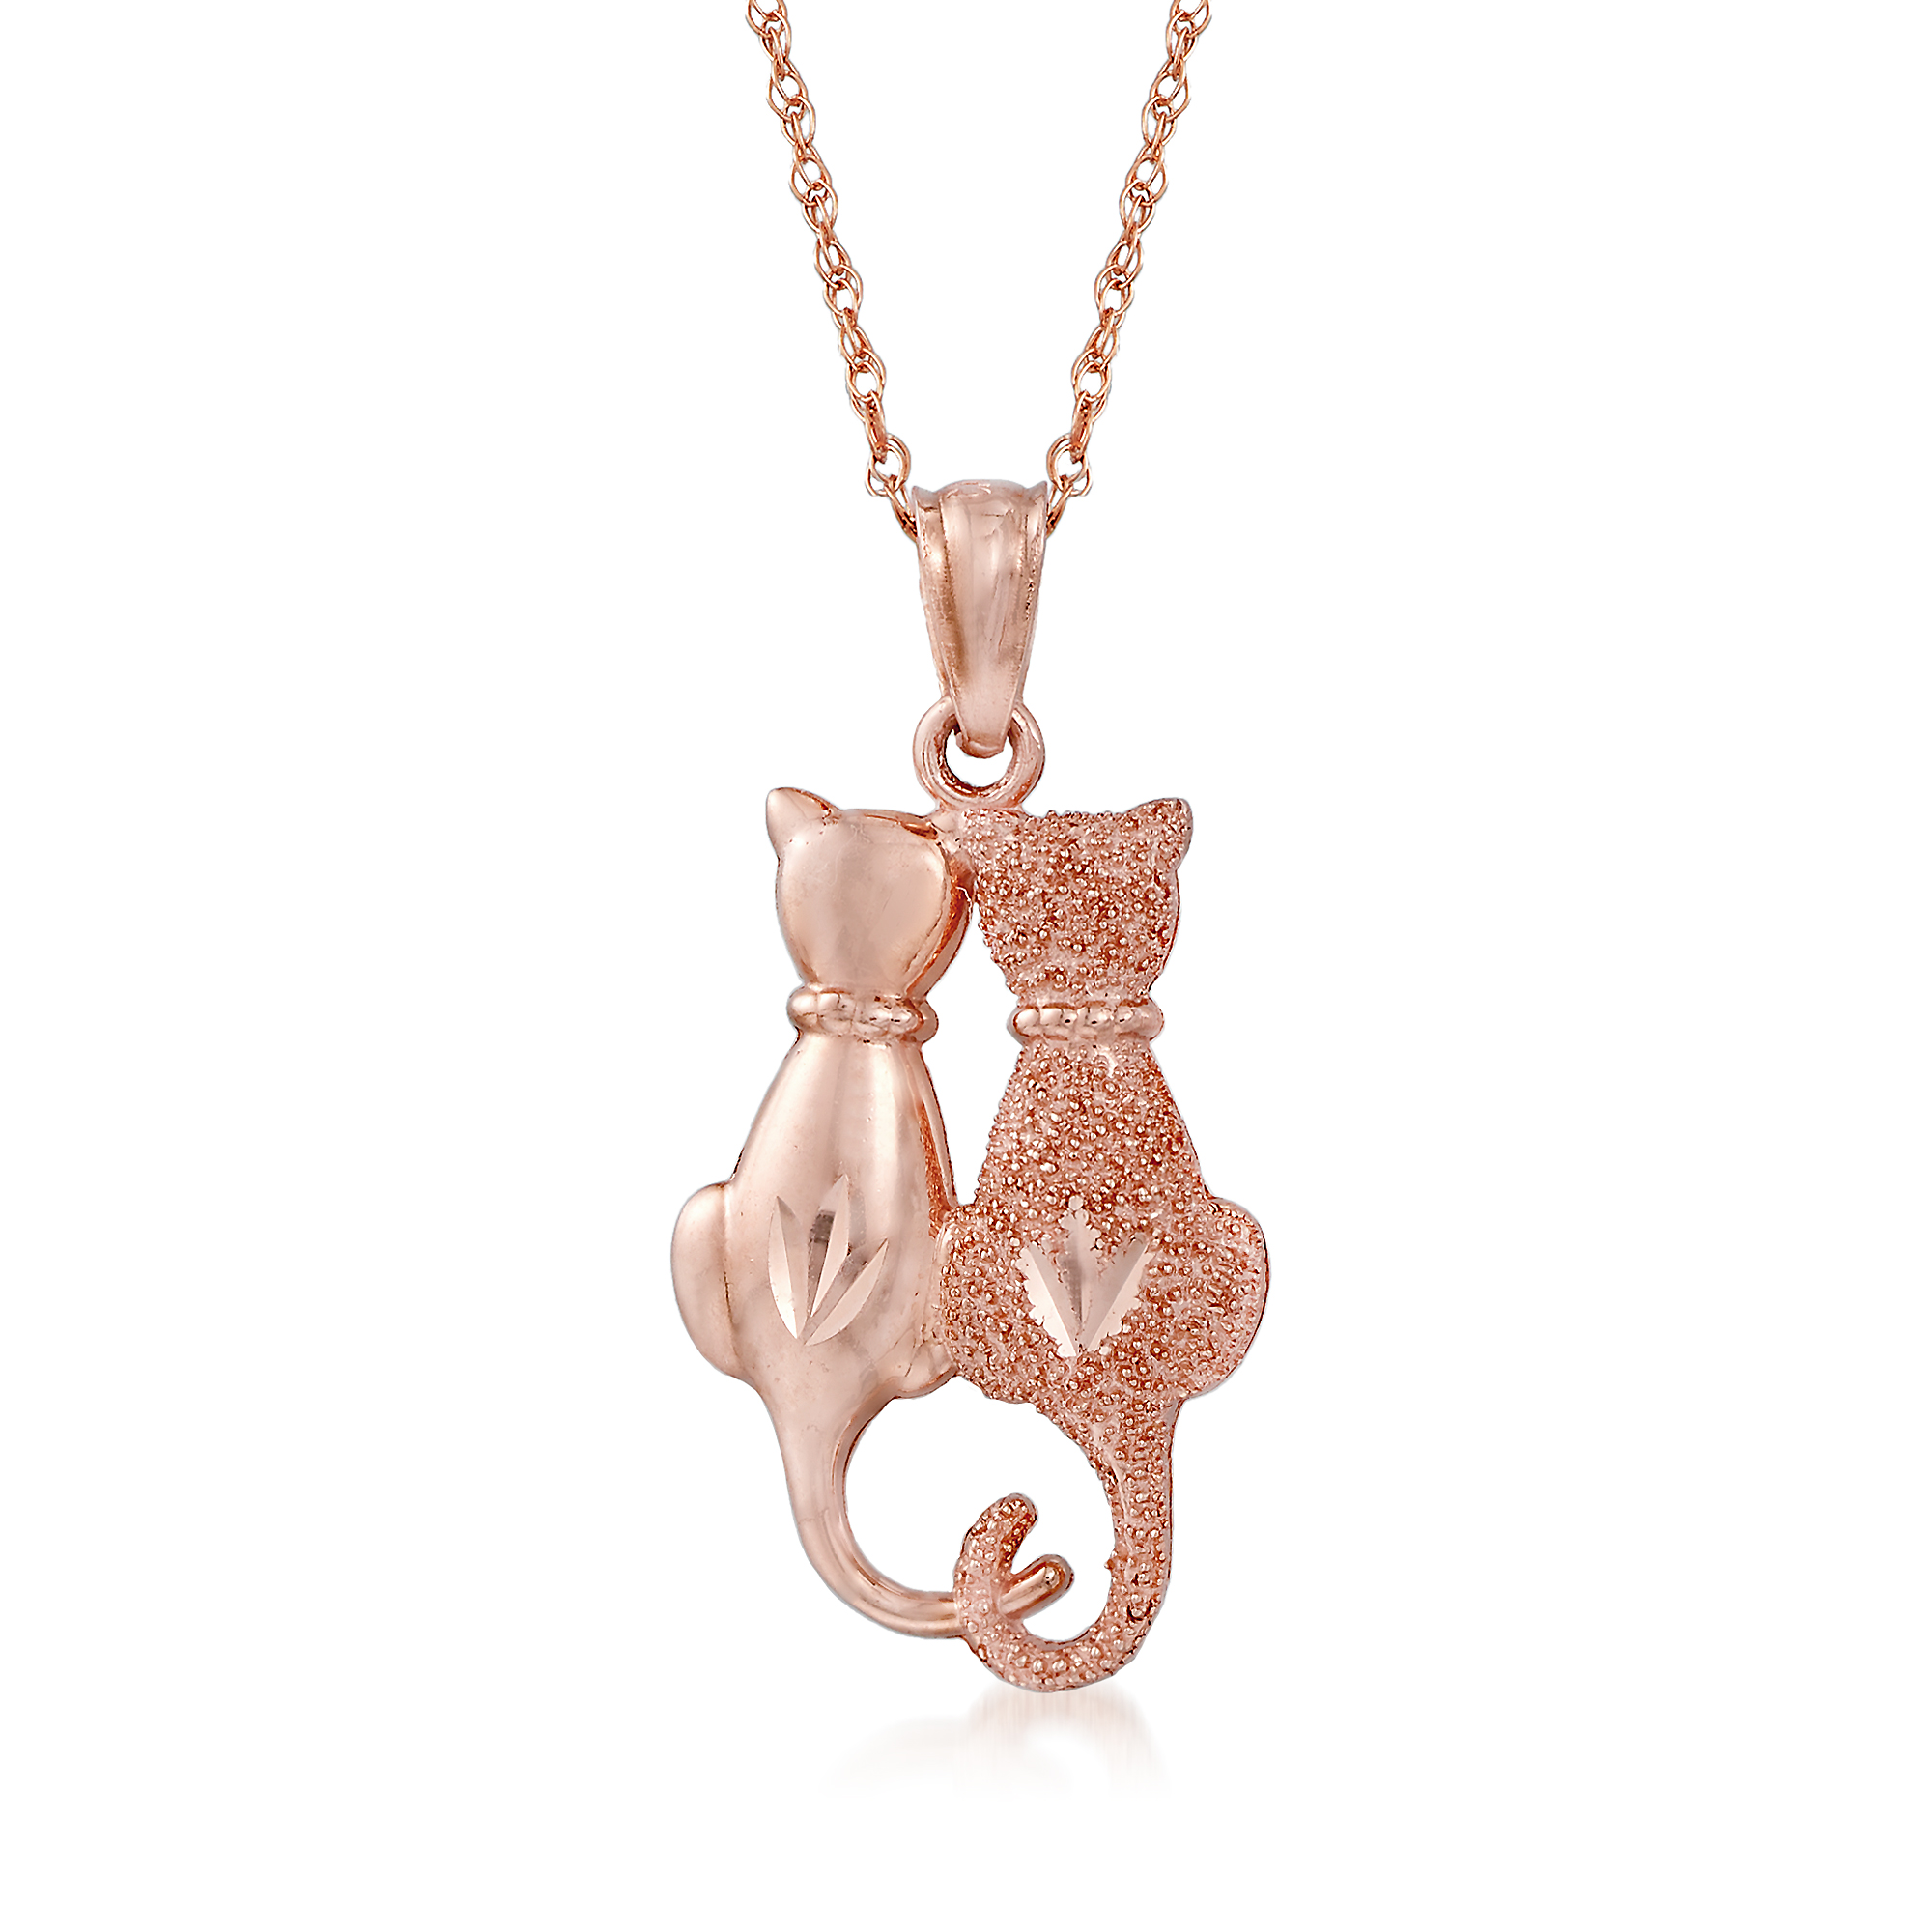 Stainless Steel Cat Jewelry- Cat Pendant Necklace Gold Tone